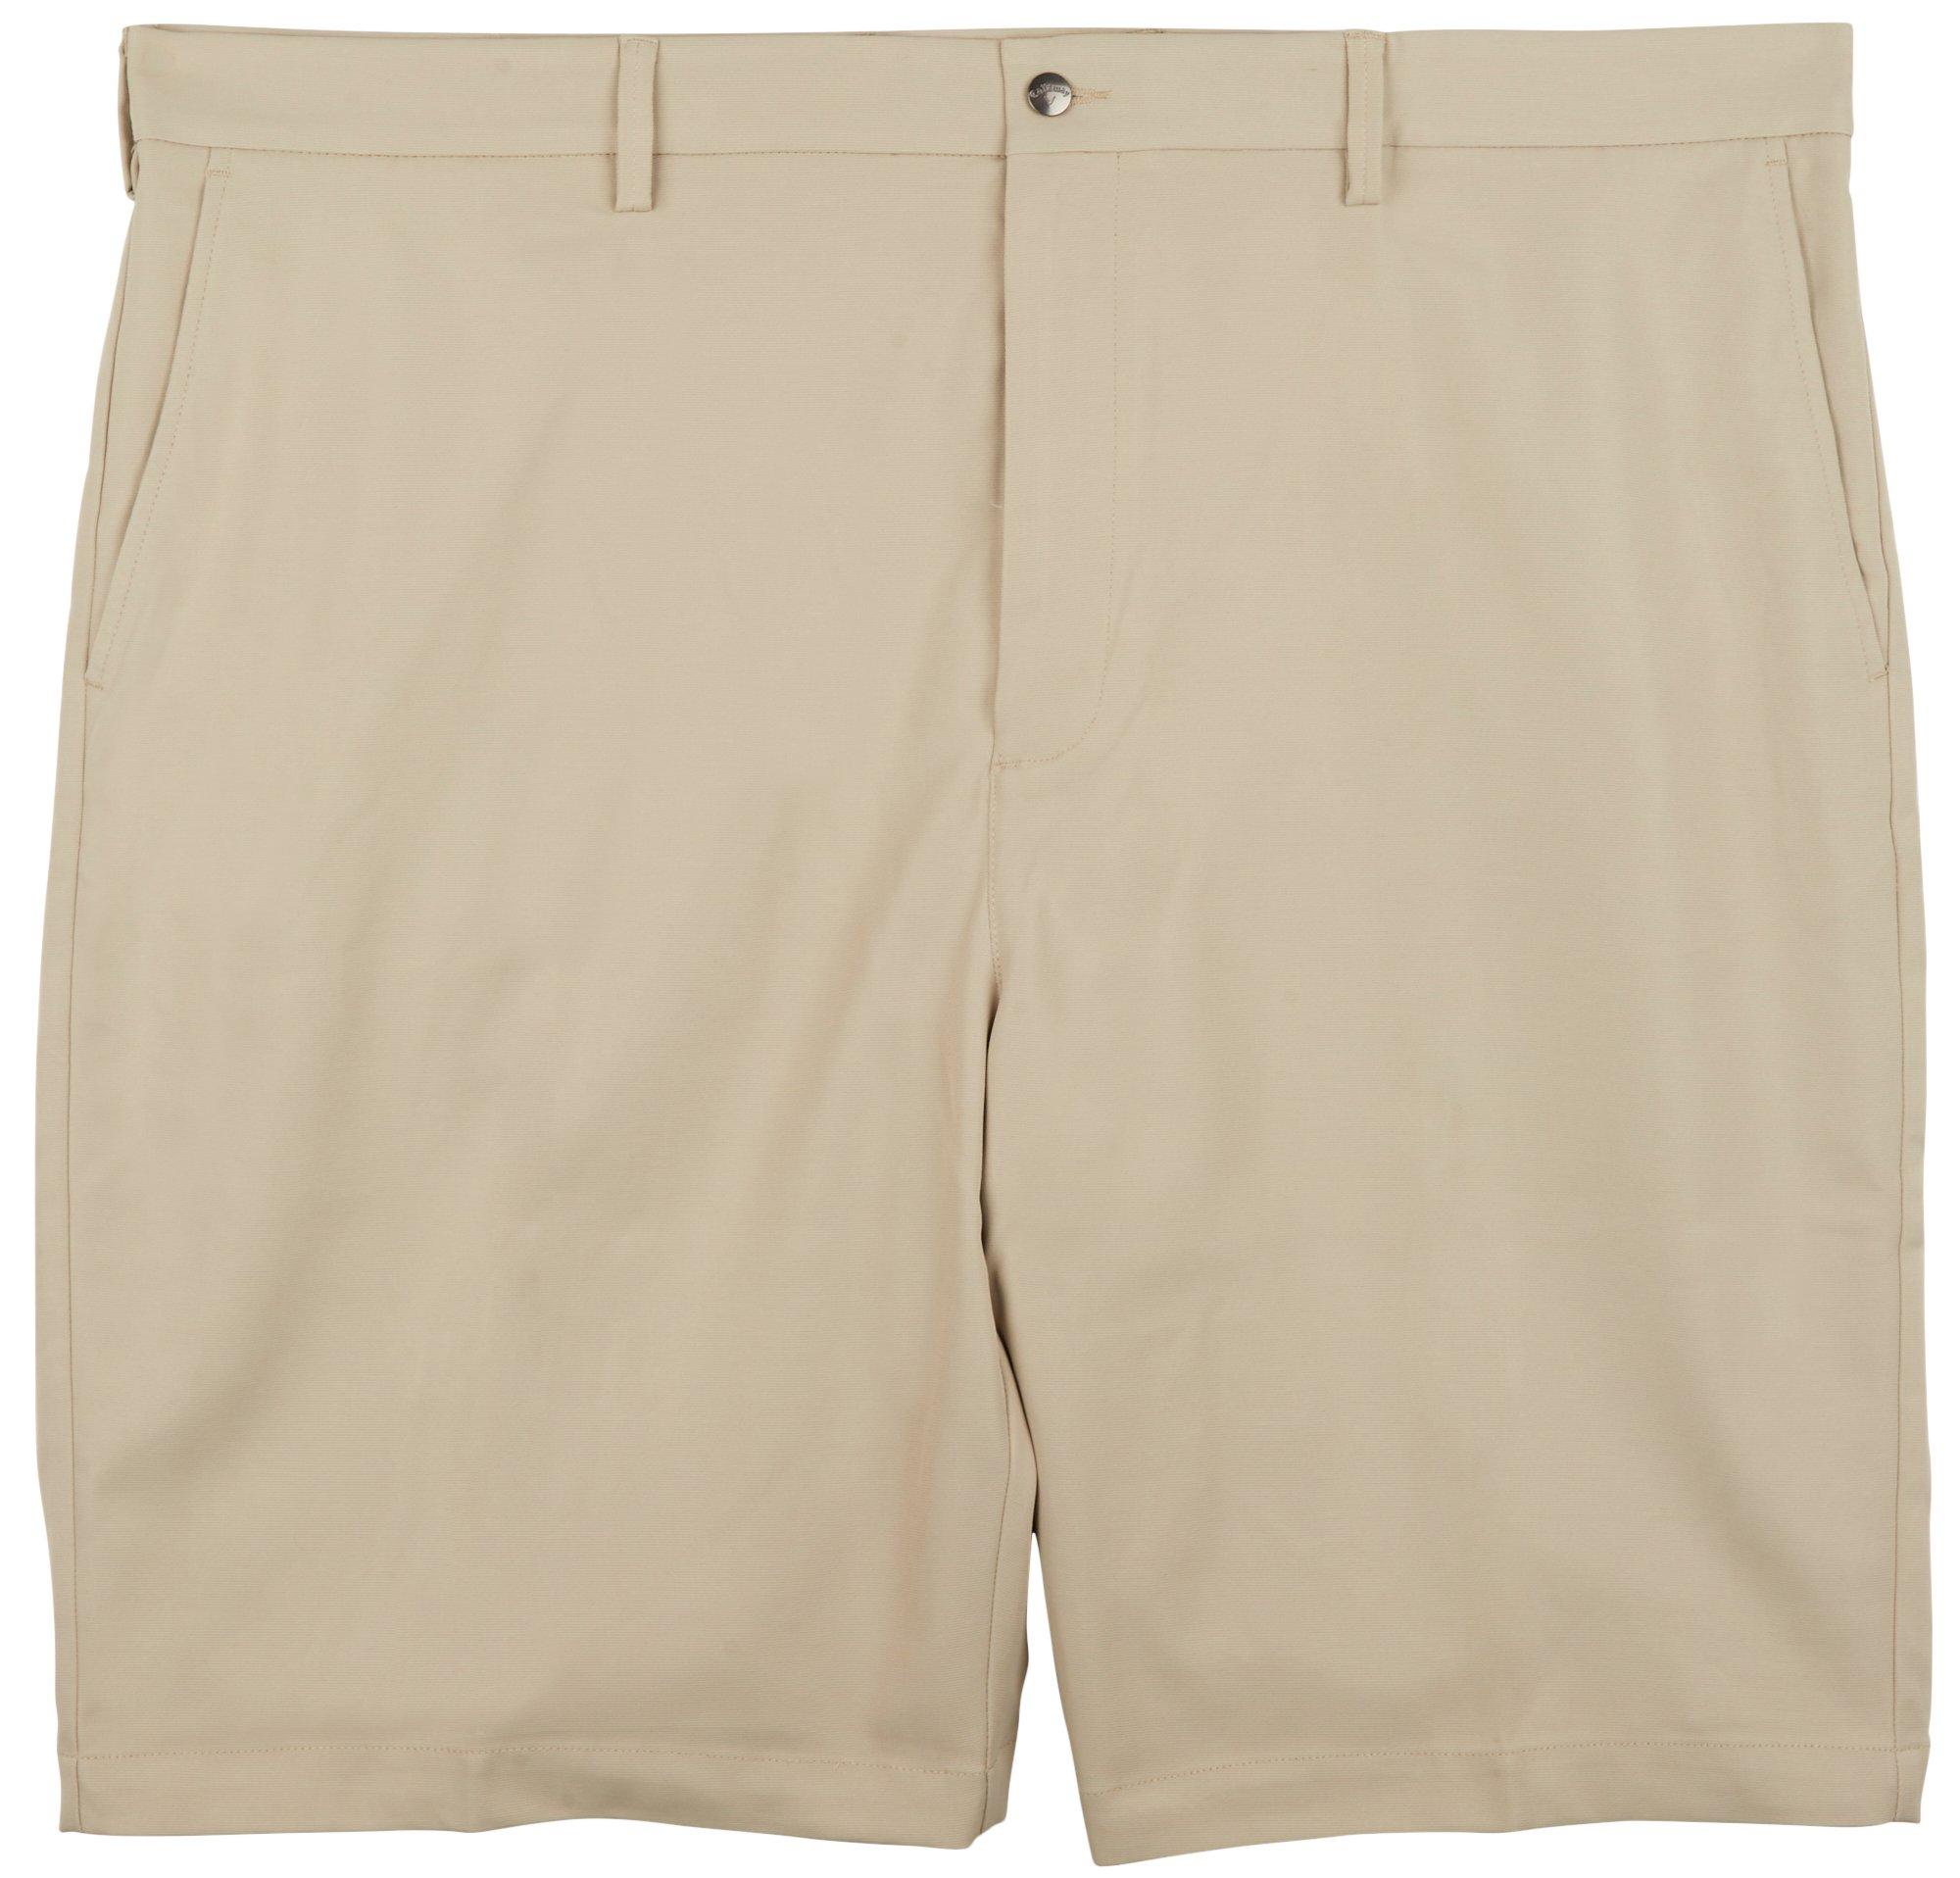 Mens Big & Tall 10.5in. Solid Flat Front Shorts